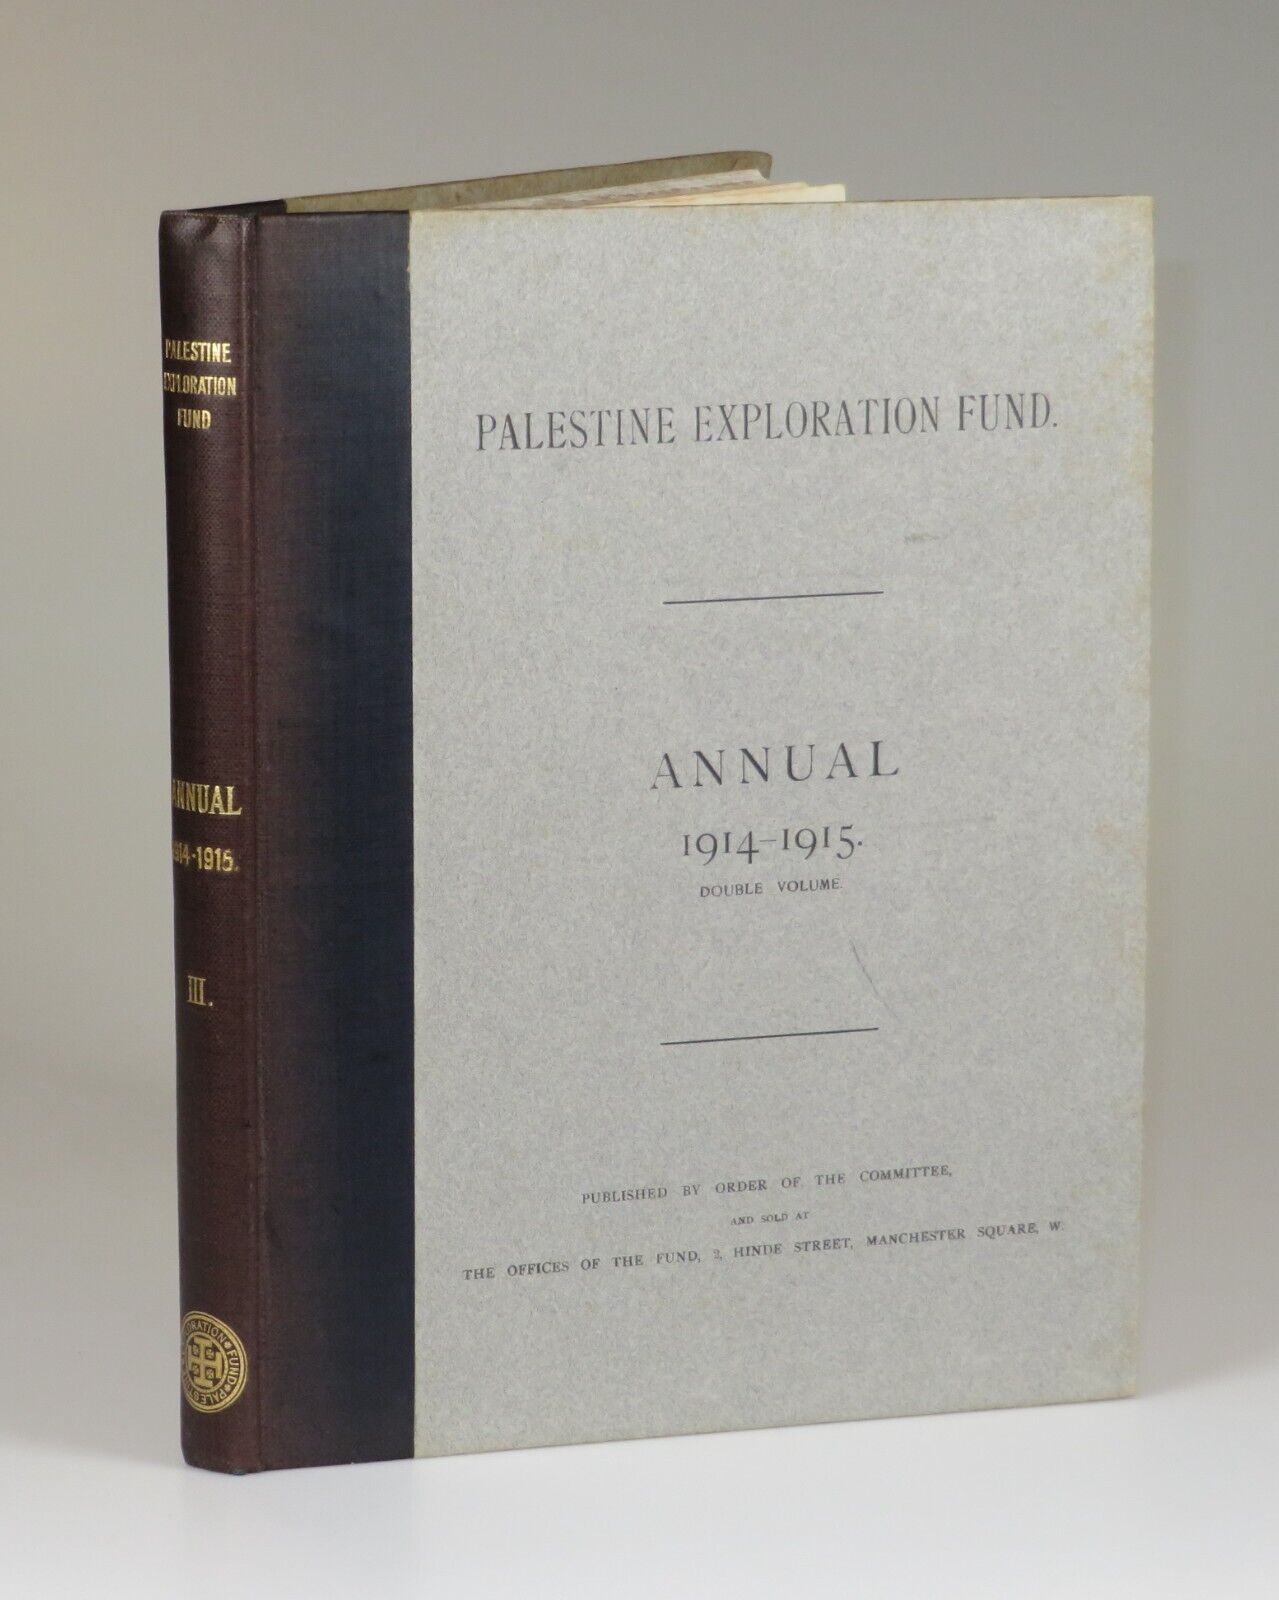 T. E. Lawrence - The Palestine Exploration Fund Annual 1914-1915 Double Volume